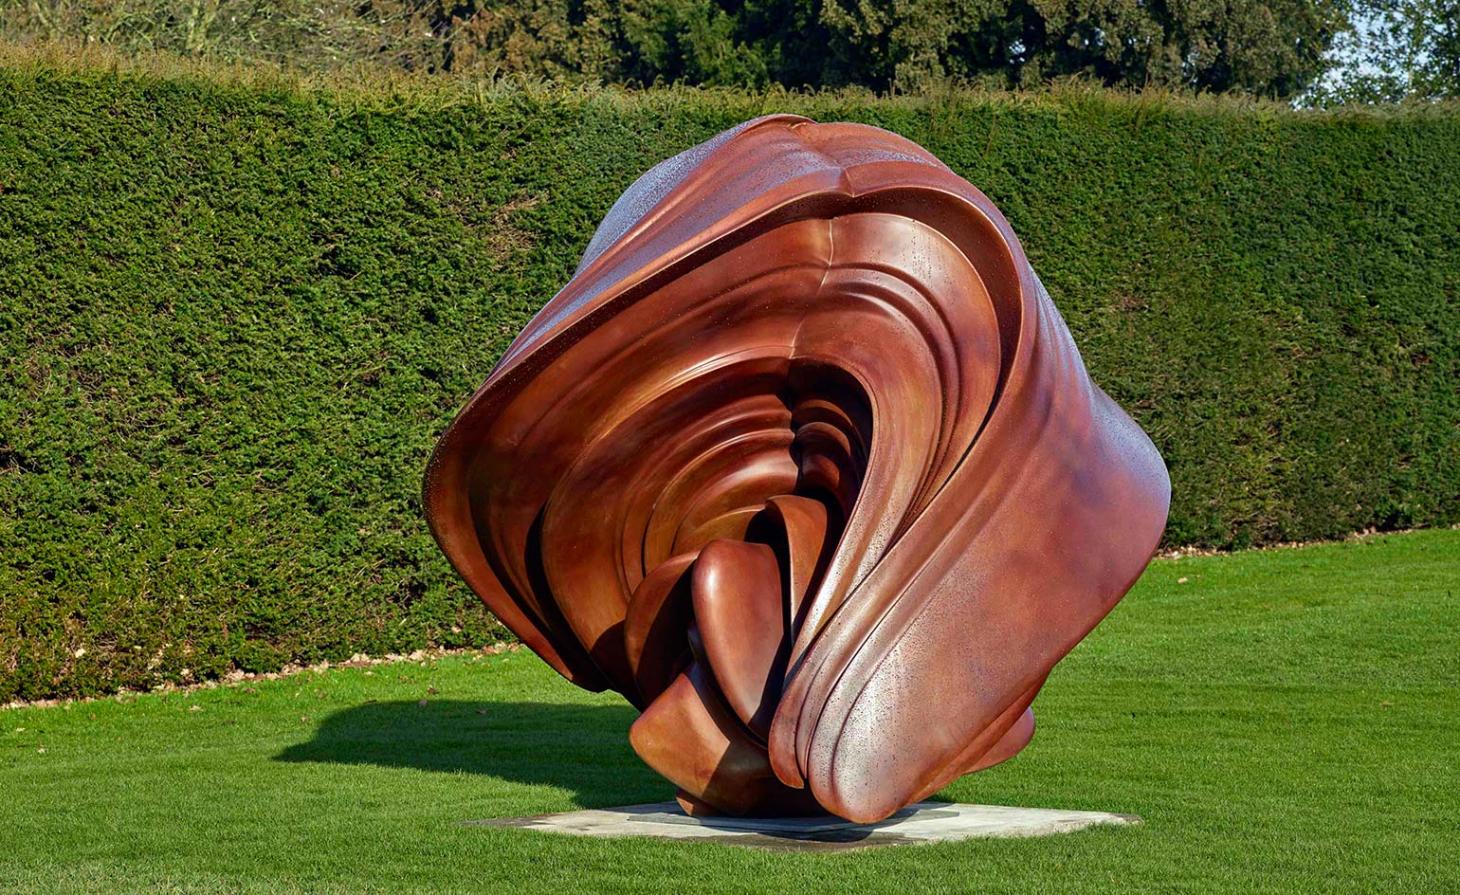 tony cragg a rare category of objects yorkshire sculpture park-22